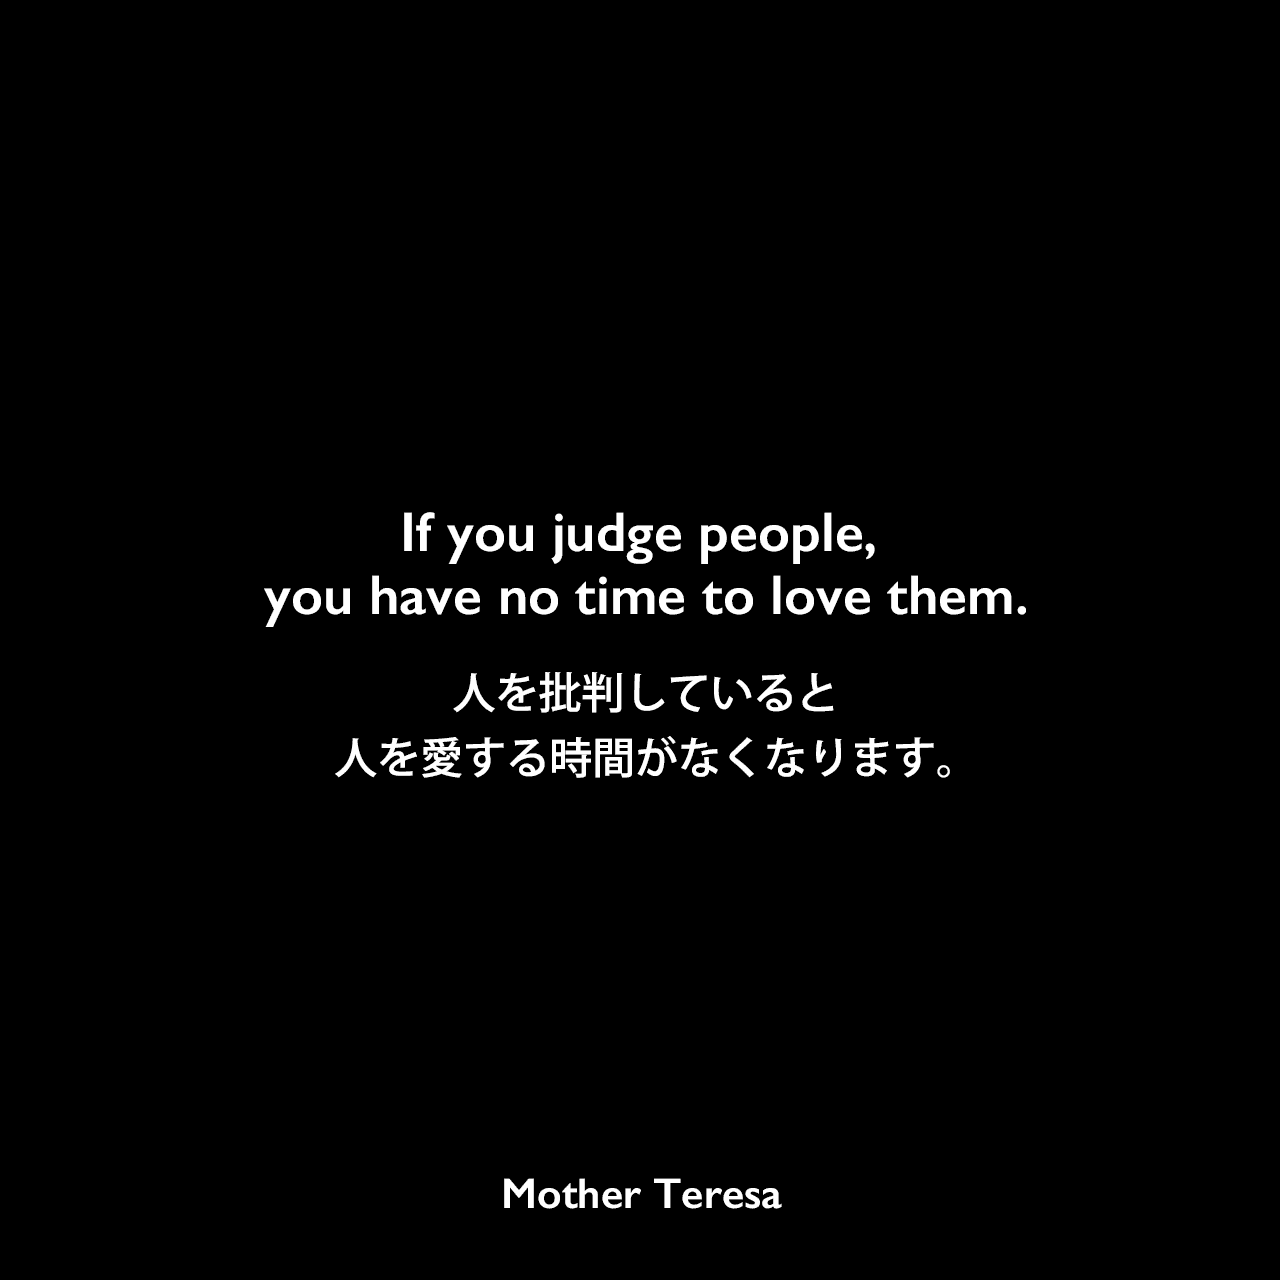 If you judge people, you have no time to love them.人を批判していると、人を愛する時間がなくなります。